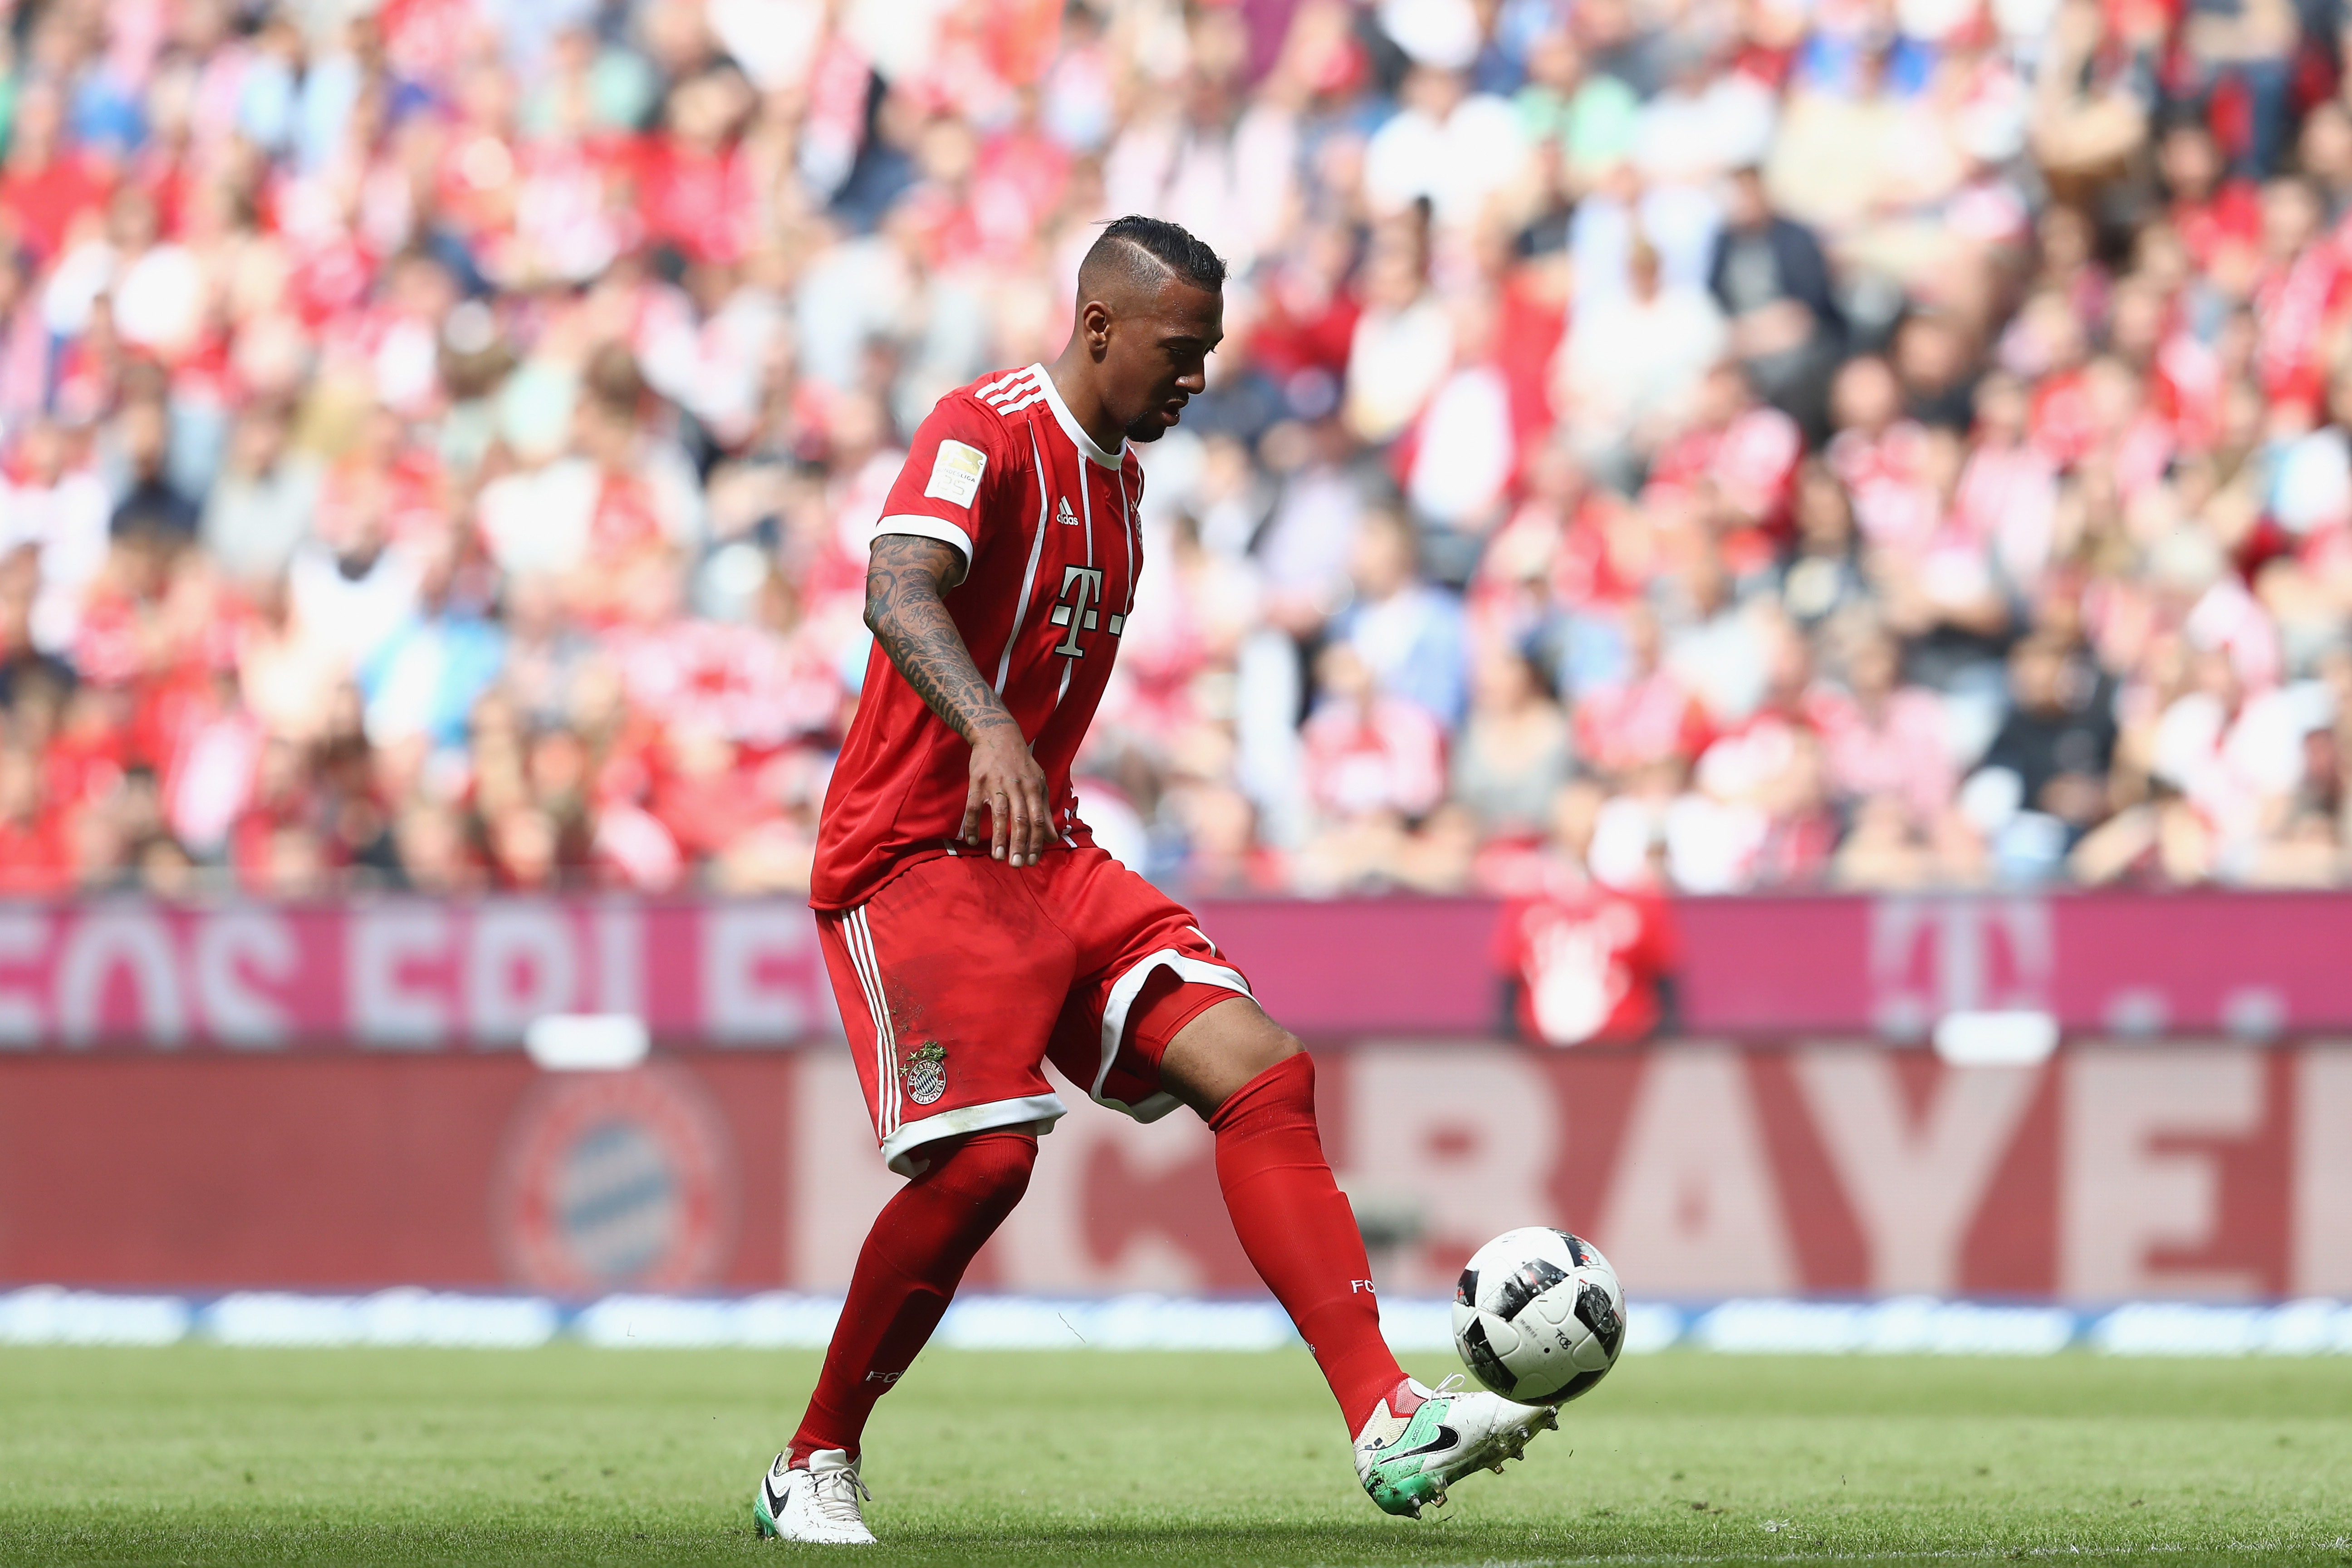 MUNICH, GERMANY - MAY 20:  Jerome Boateng  of Bayern Muenchen runs with the ball during the Bundesliga match between Bayern Muenchen and SC Freiburg at Allianz Arena on May 20, 2017 in Munich, Germany.  (Photo by Alexander Hassenstein/Bongarts/Getty Images)